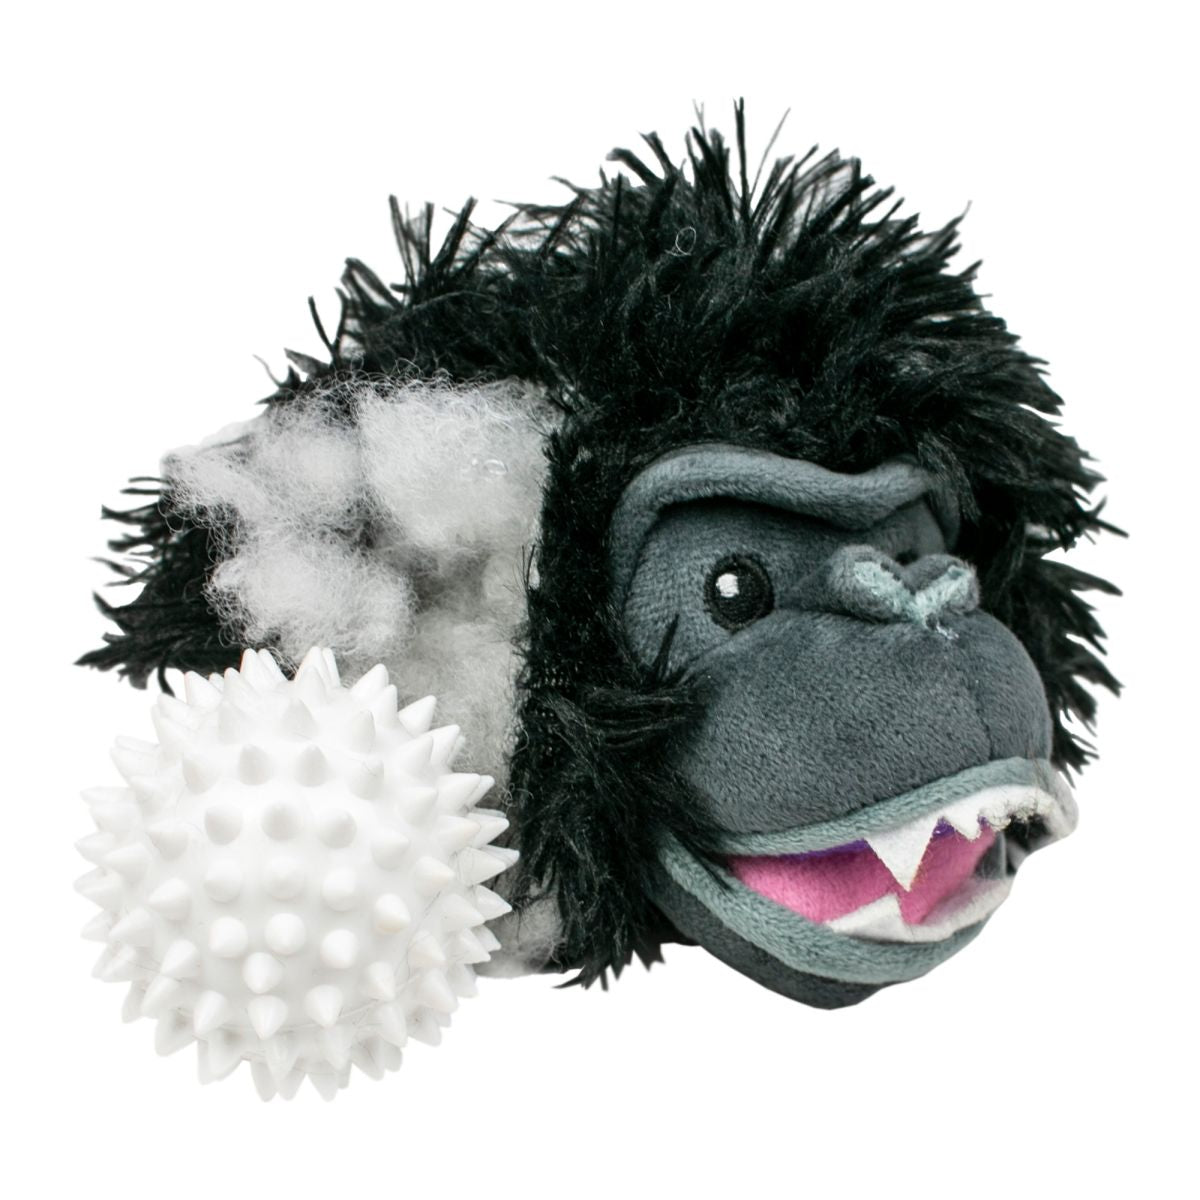 Gorilla 2-IN-1 FETCH BALL DOG TOY Tall tails